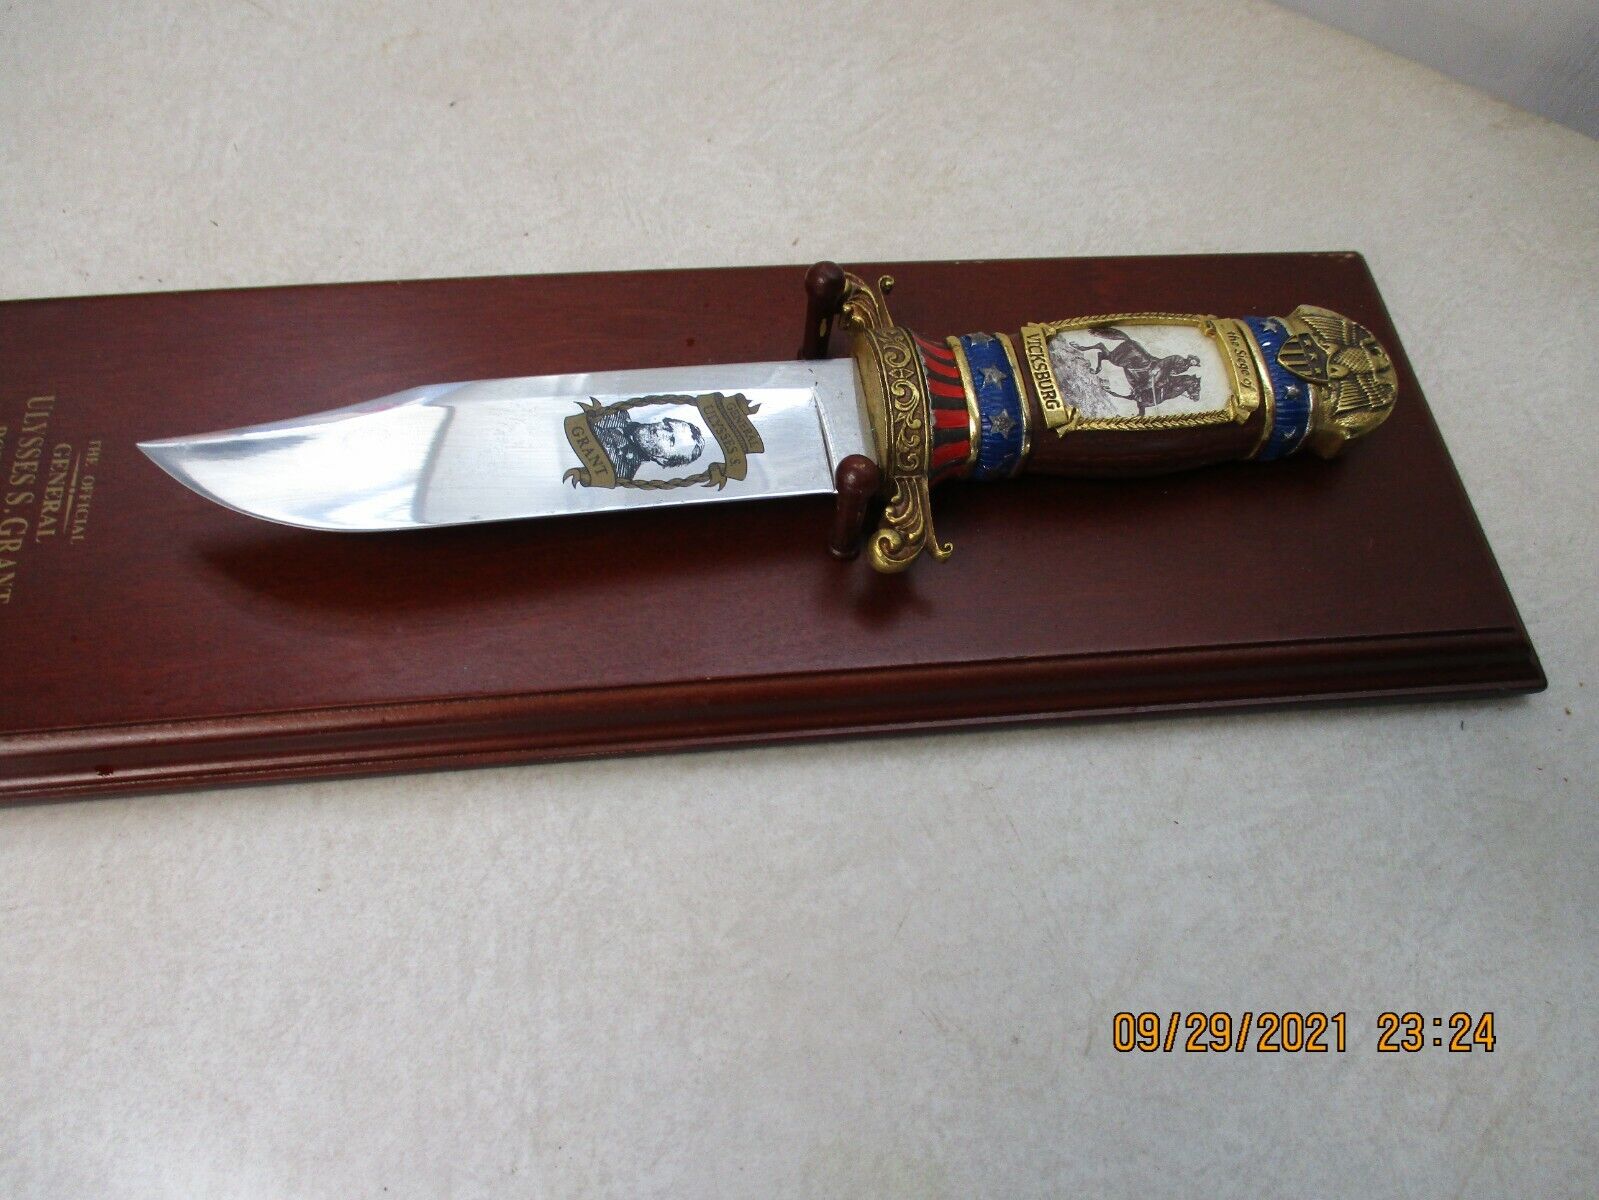  THE OFFICAL FRANKLIN MINT ULYSSES S. GRANT BOWIE KNIFE MOUNTED HARD WOOD PLAQUE